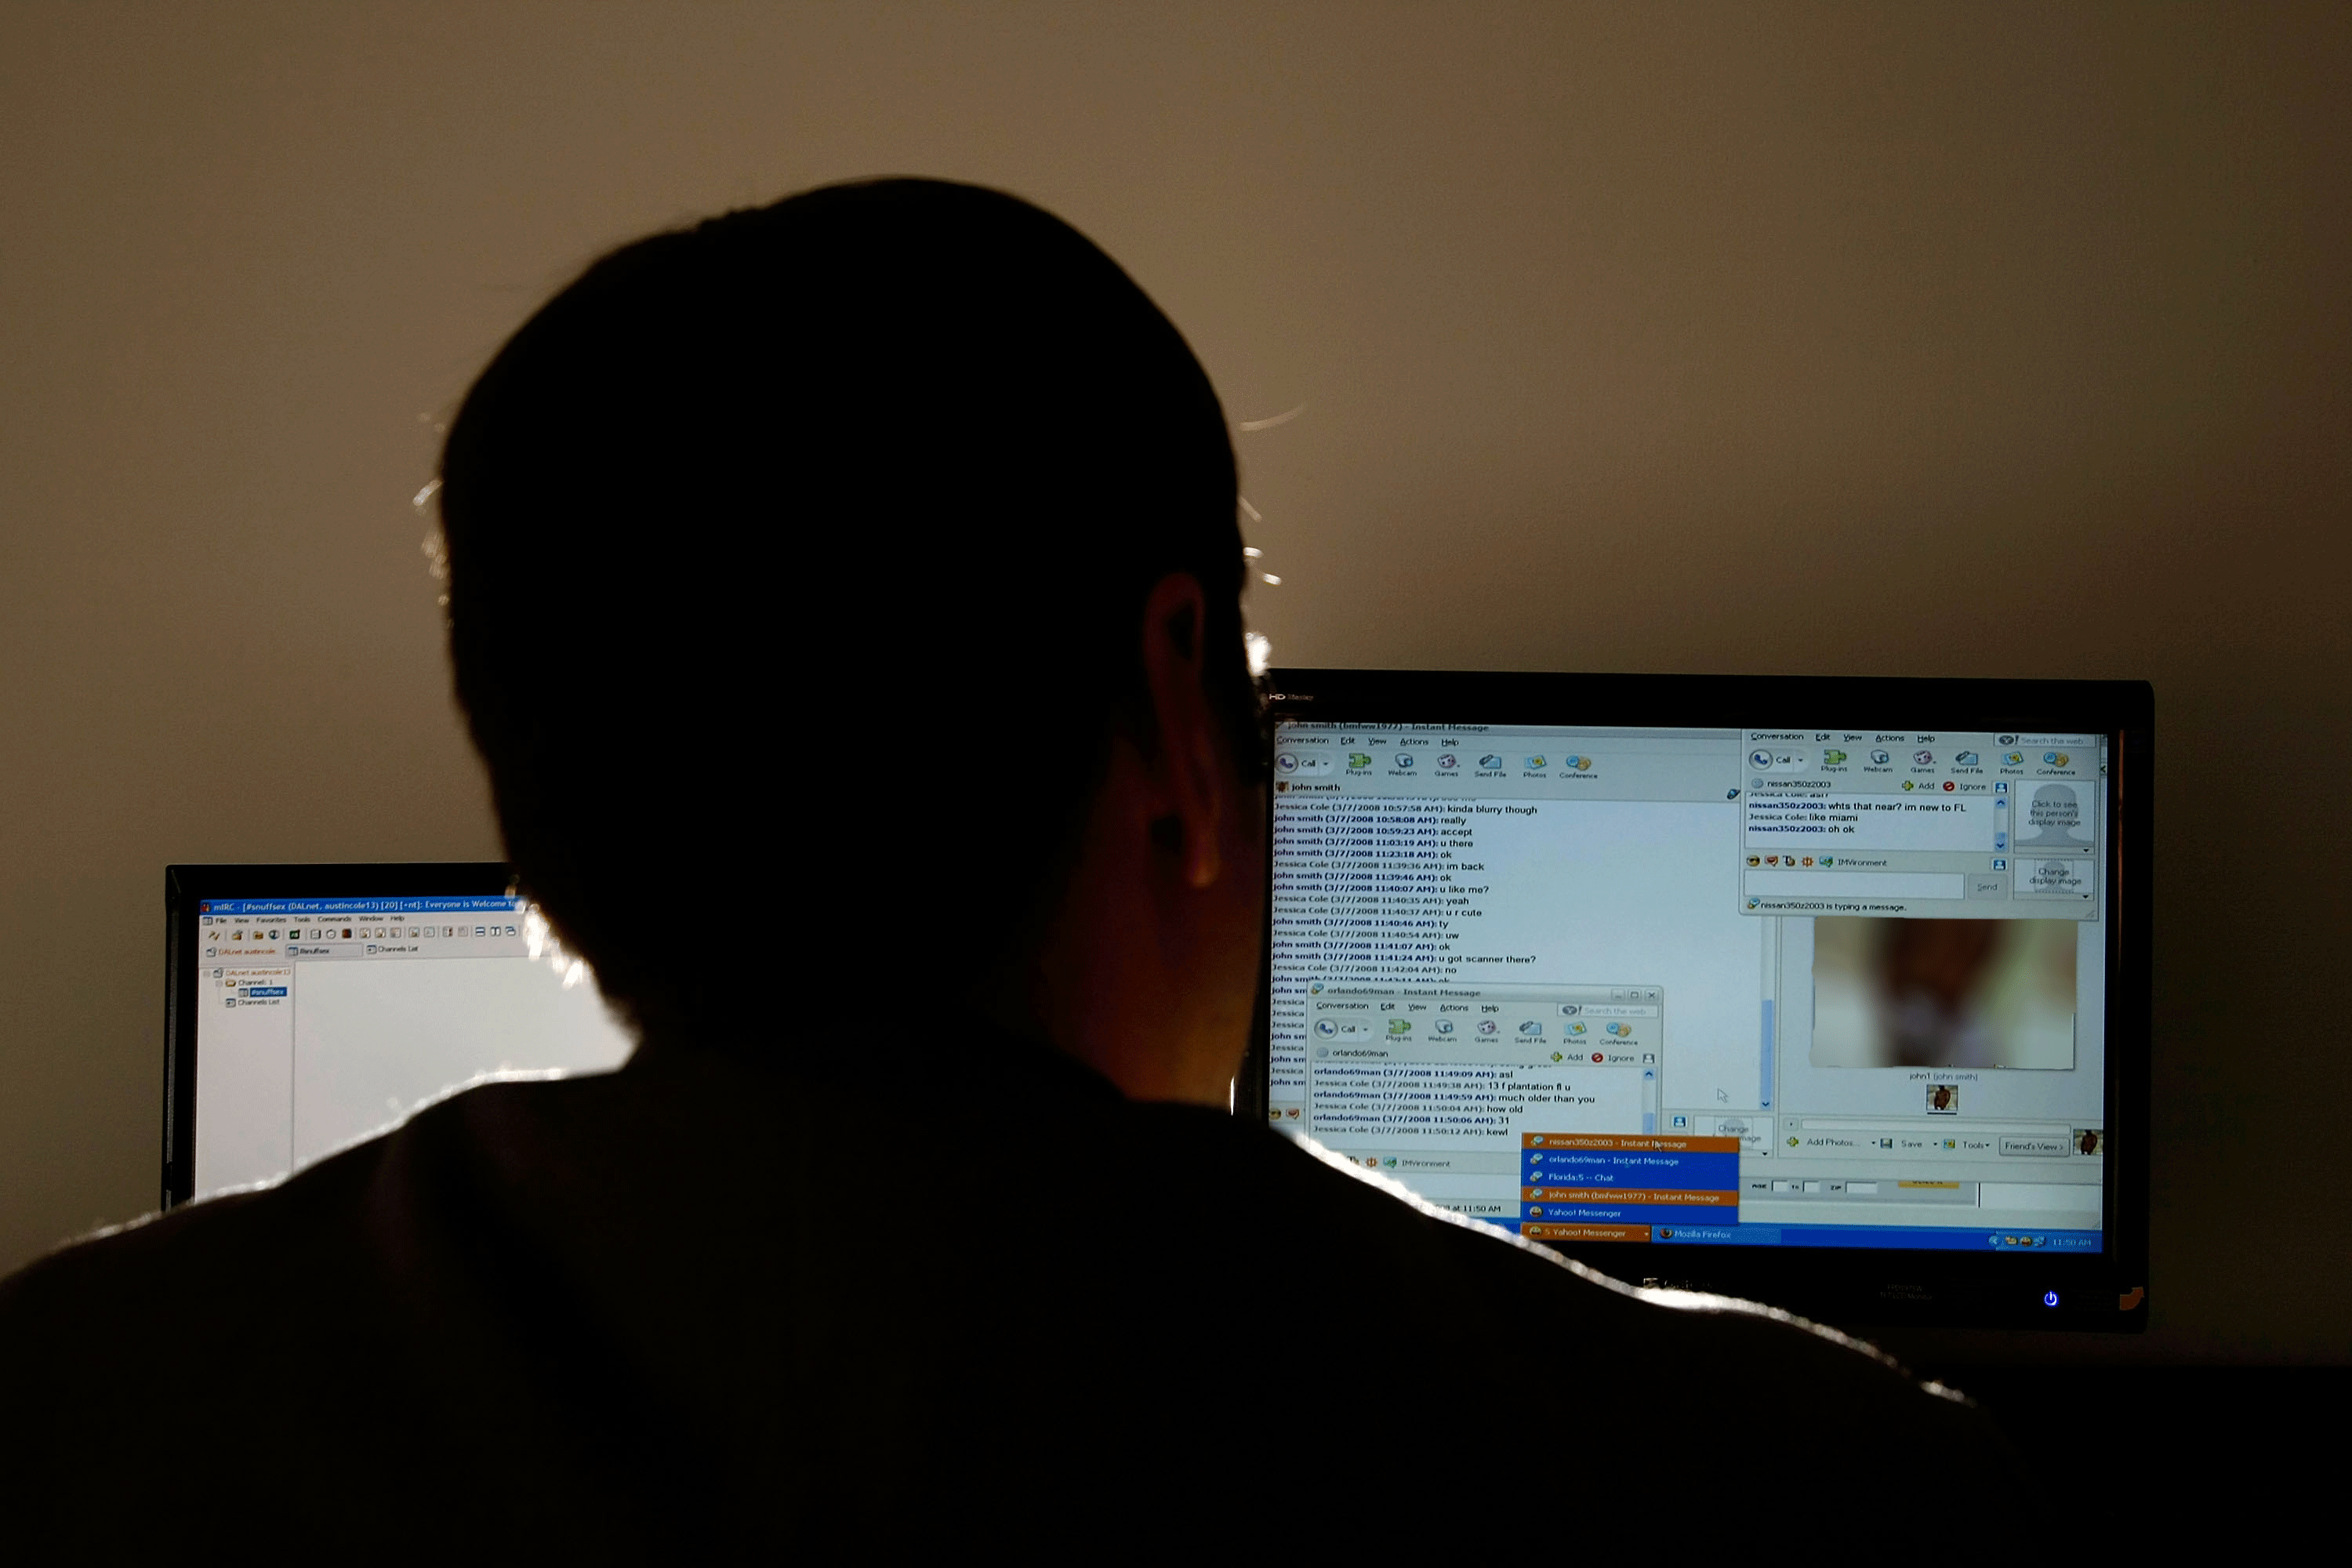 Paedophiles could be offered counselling to combat 'massive' online child pornography problem